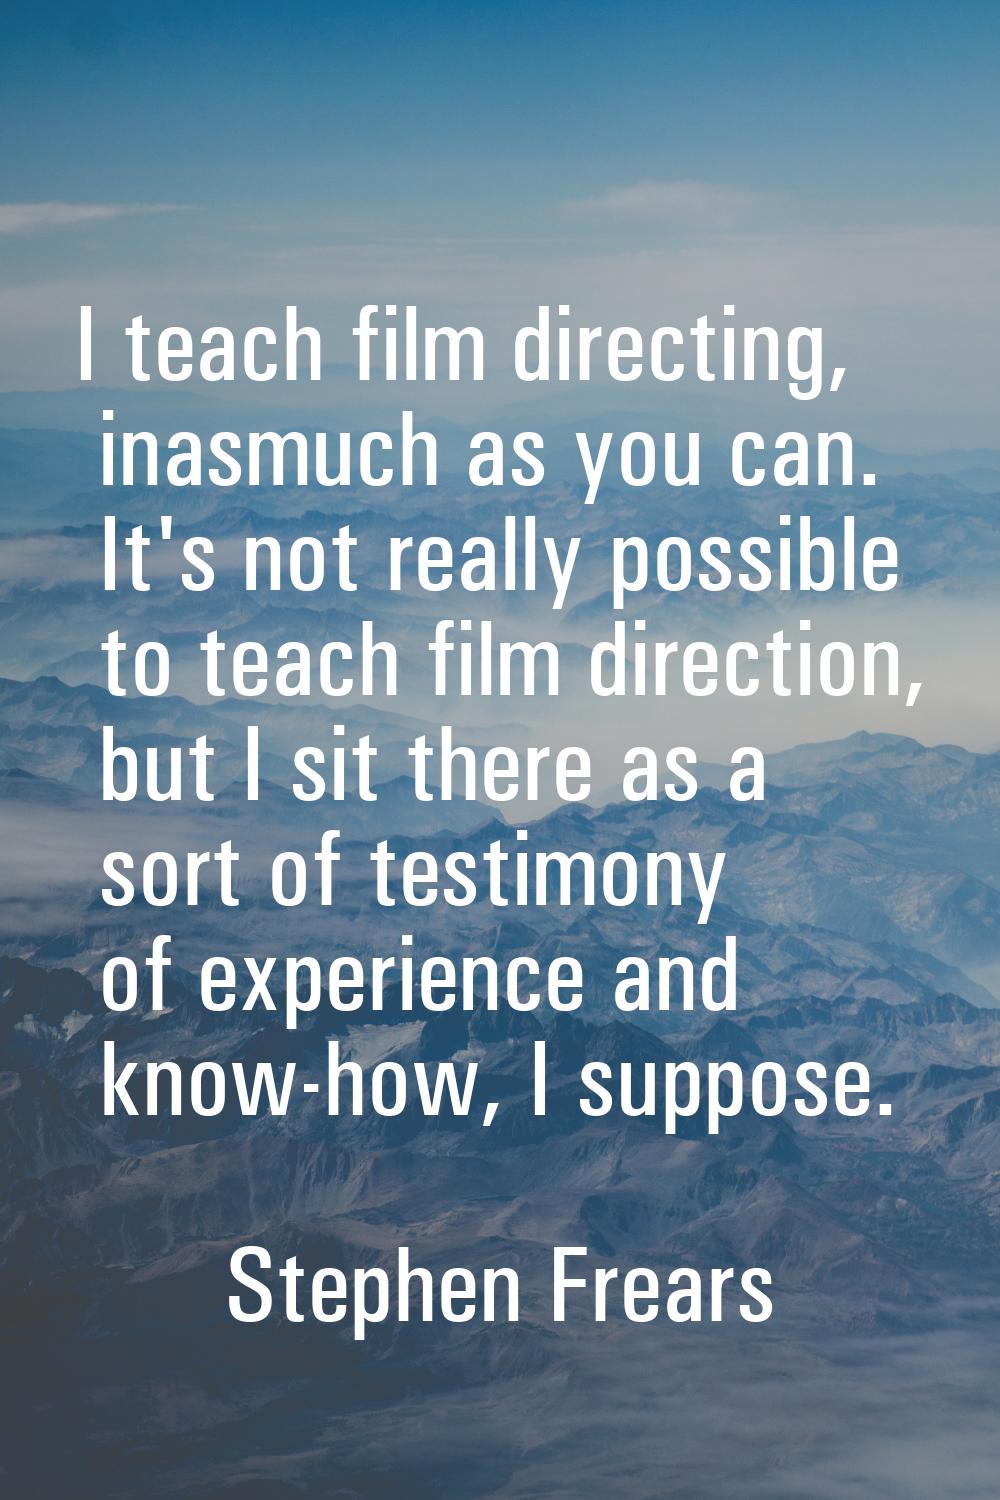 I teach film directing, inasmuch as you can. It's not really possible to teach film direction, but 